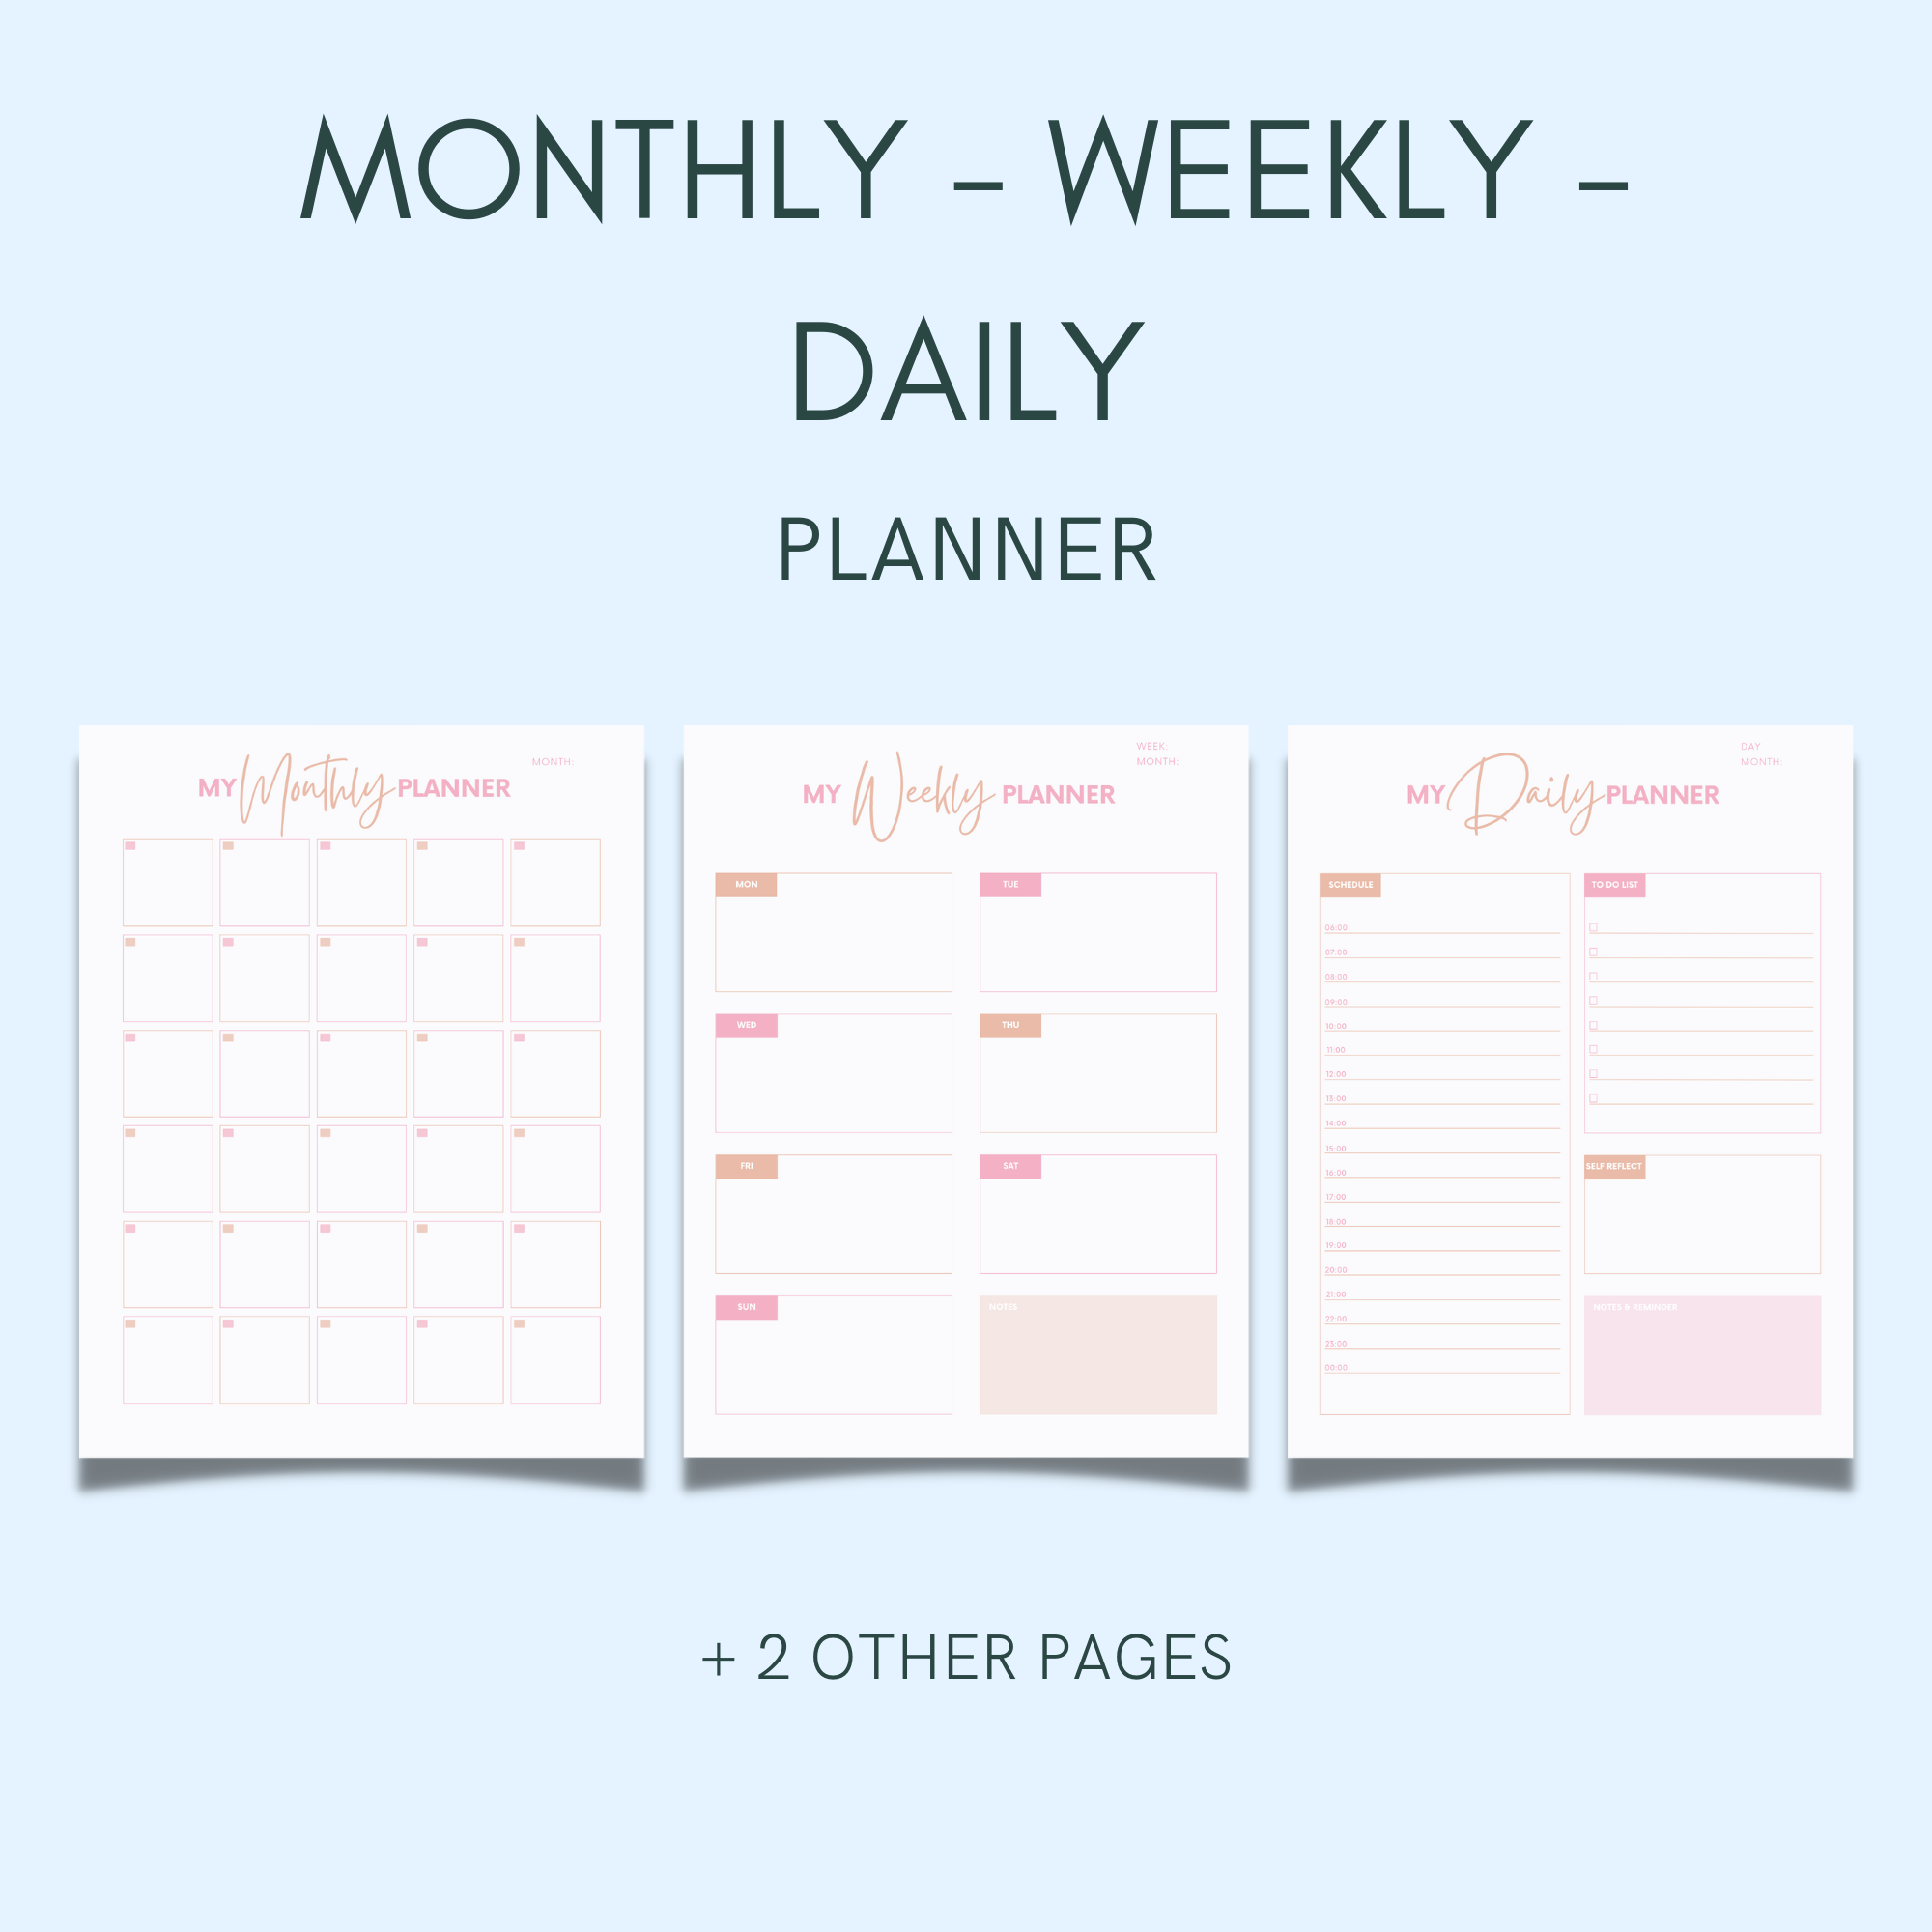 Monthly Weekly Daily Printable Planner cover image.